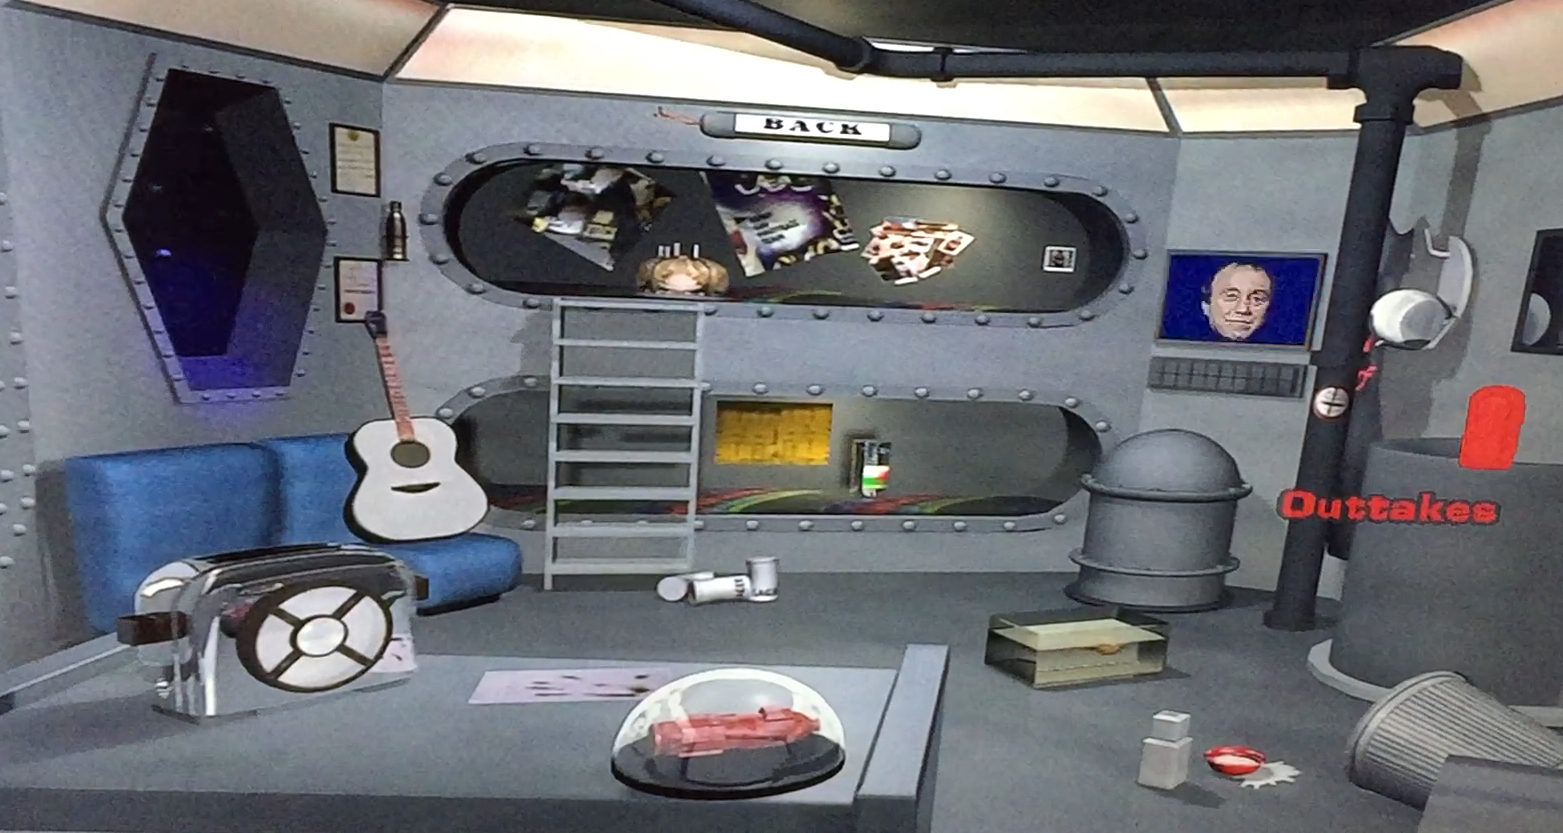 The extras DVD menu for Red Dwarf series 1. The screen shows the bunk room where Lister and Rimmer sleep, and by moving around the screen you can select various items to access different features e.g. the guitar, toaster, model of the ship, computer screen, etc.